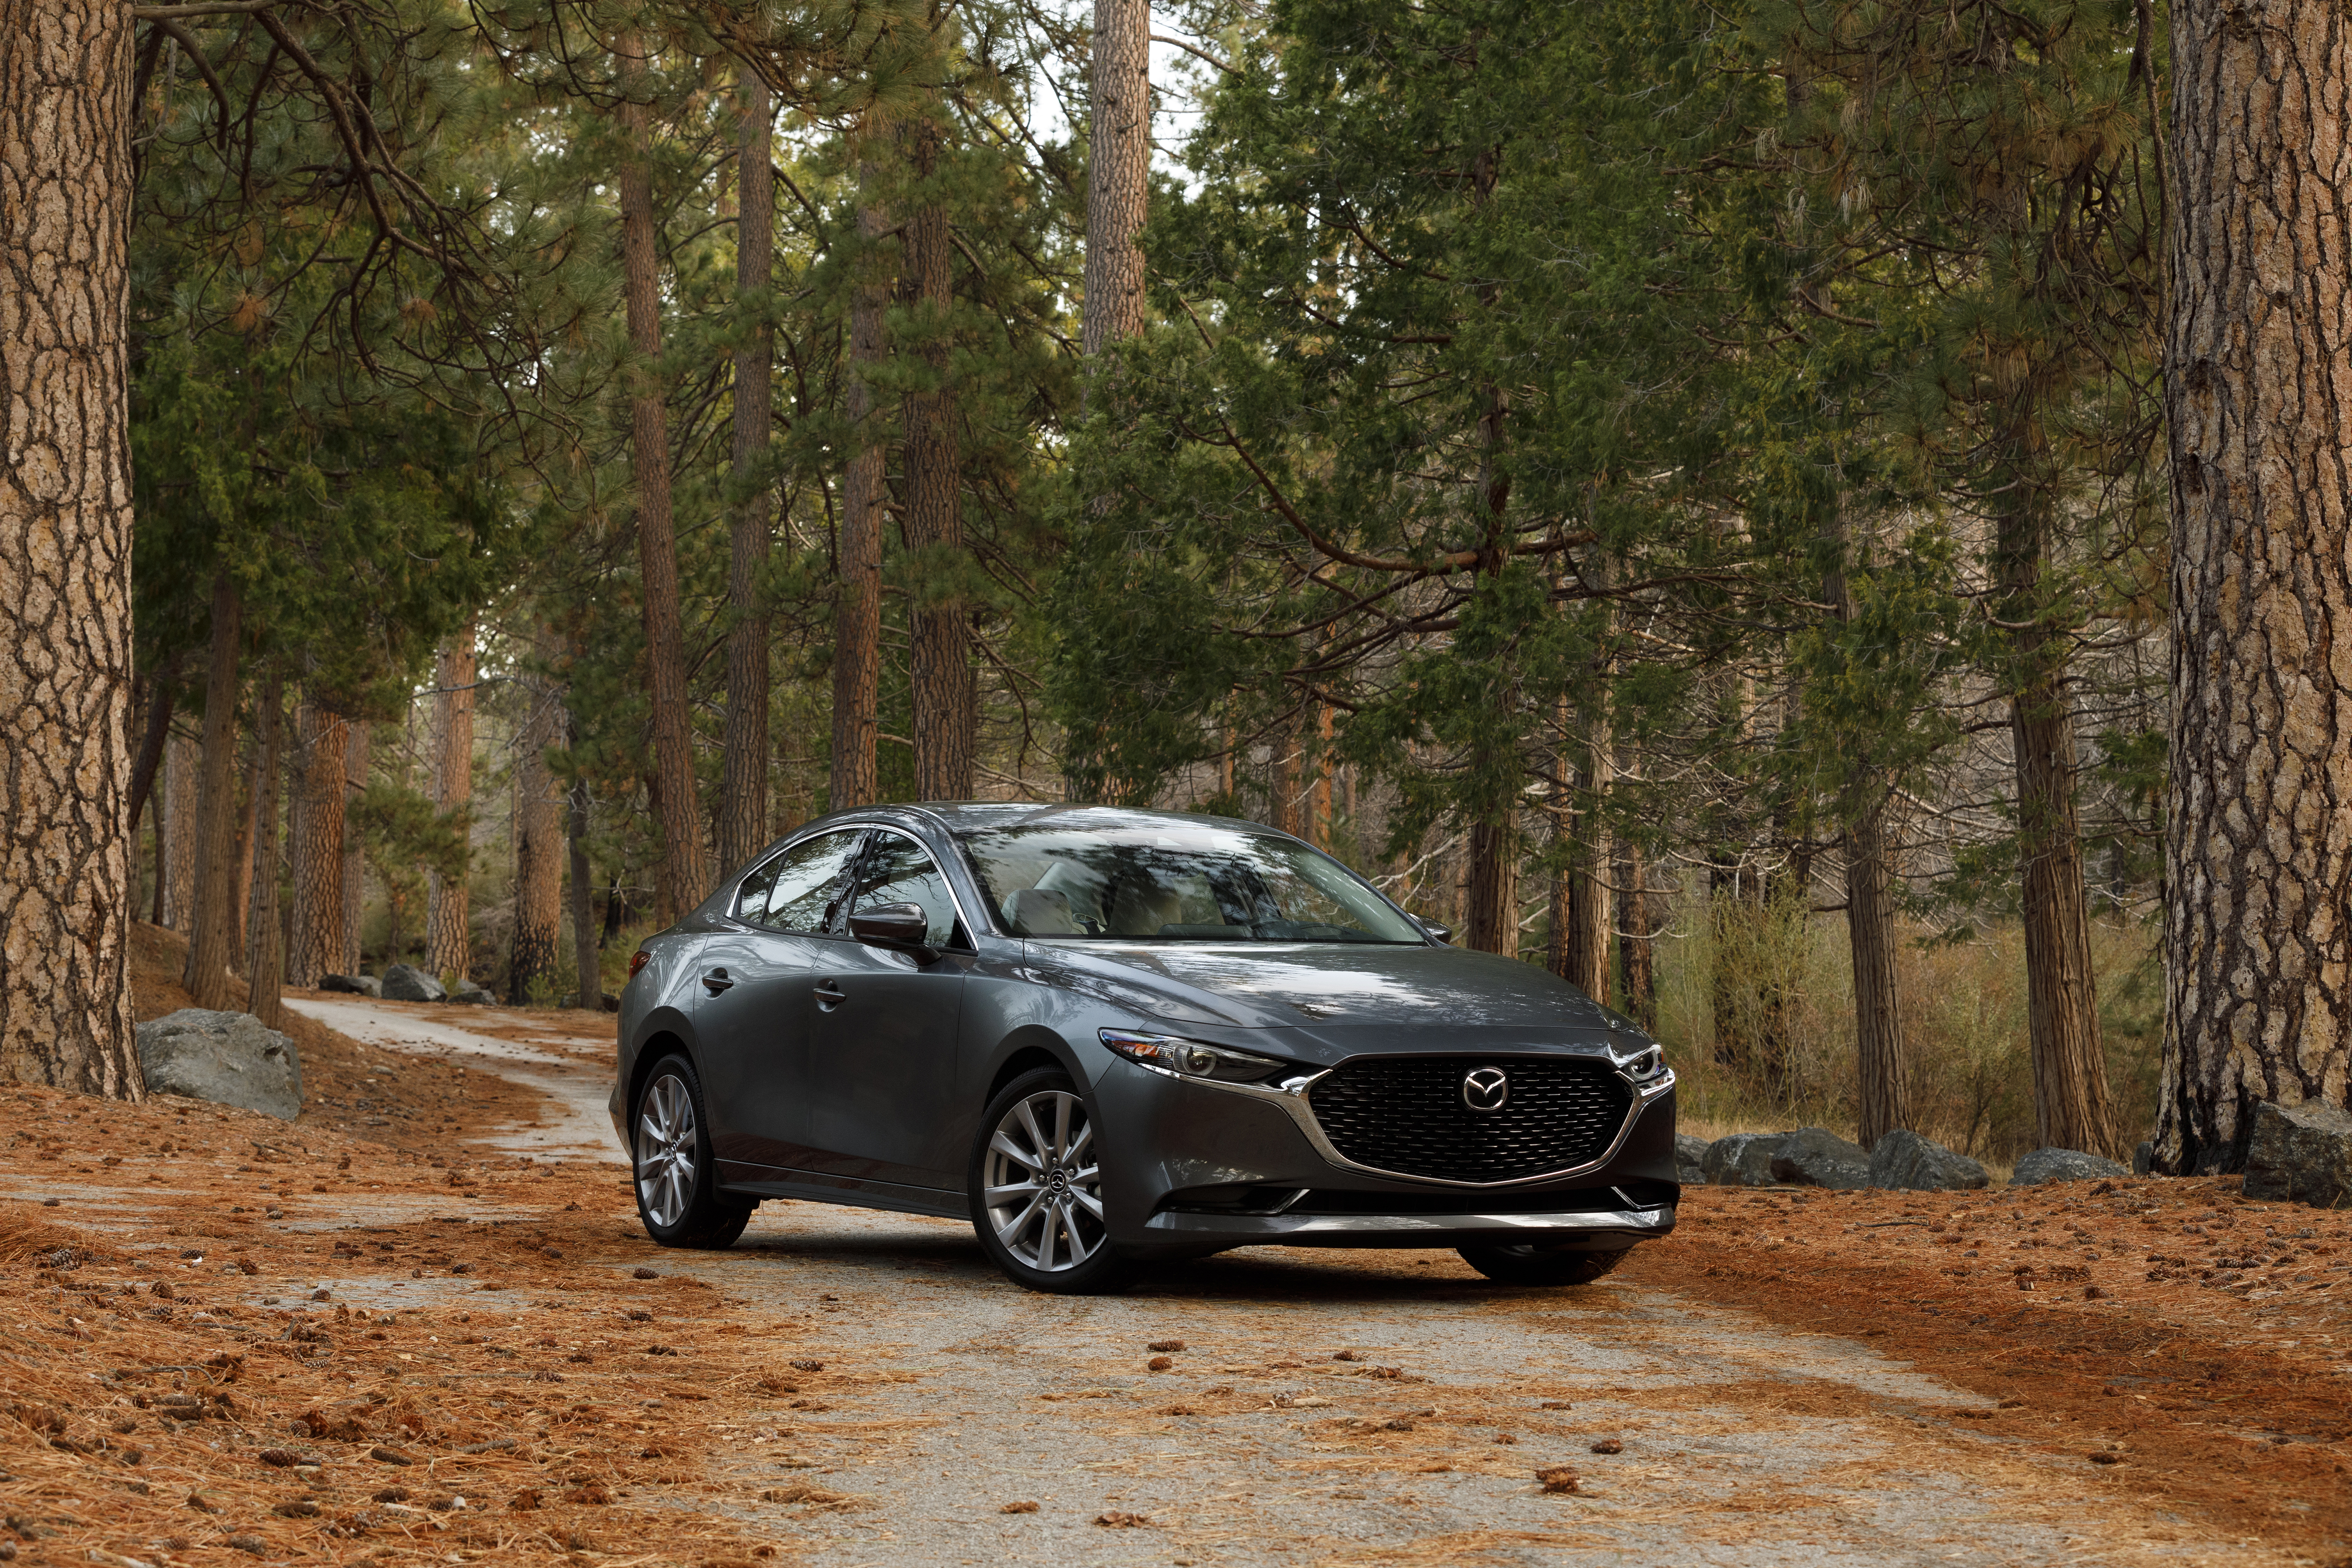 , Comfort, Safety, Style &#8211; 2019 Mazda3, Days of a Domestic Dad